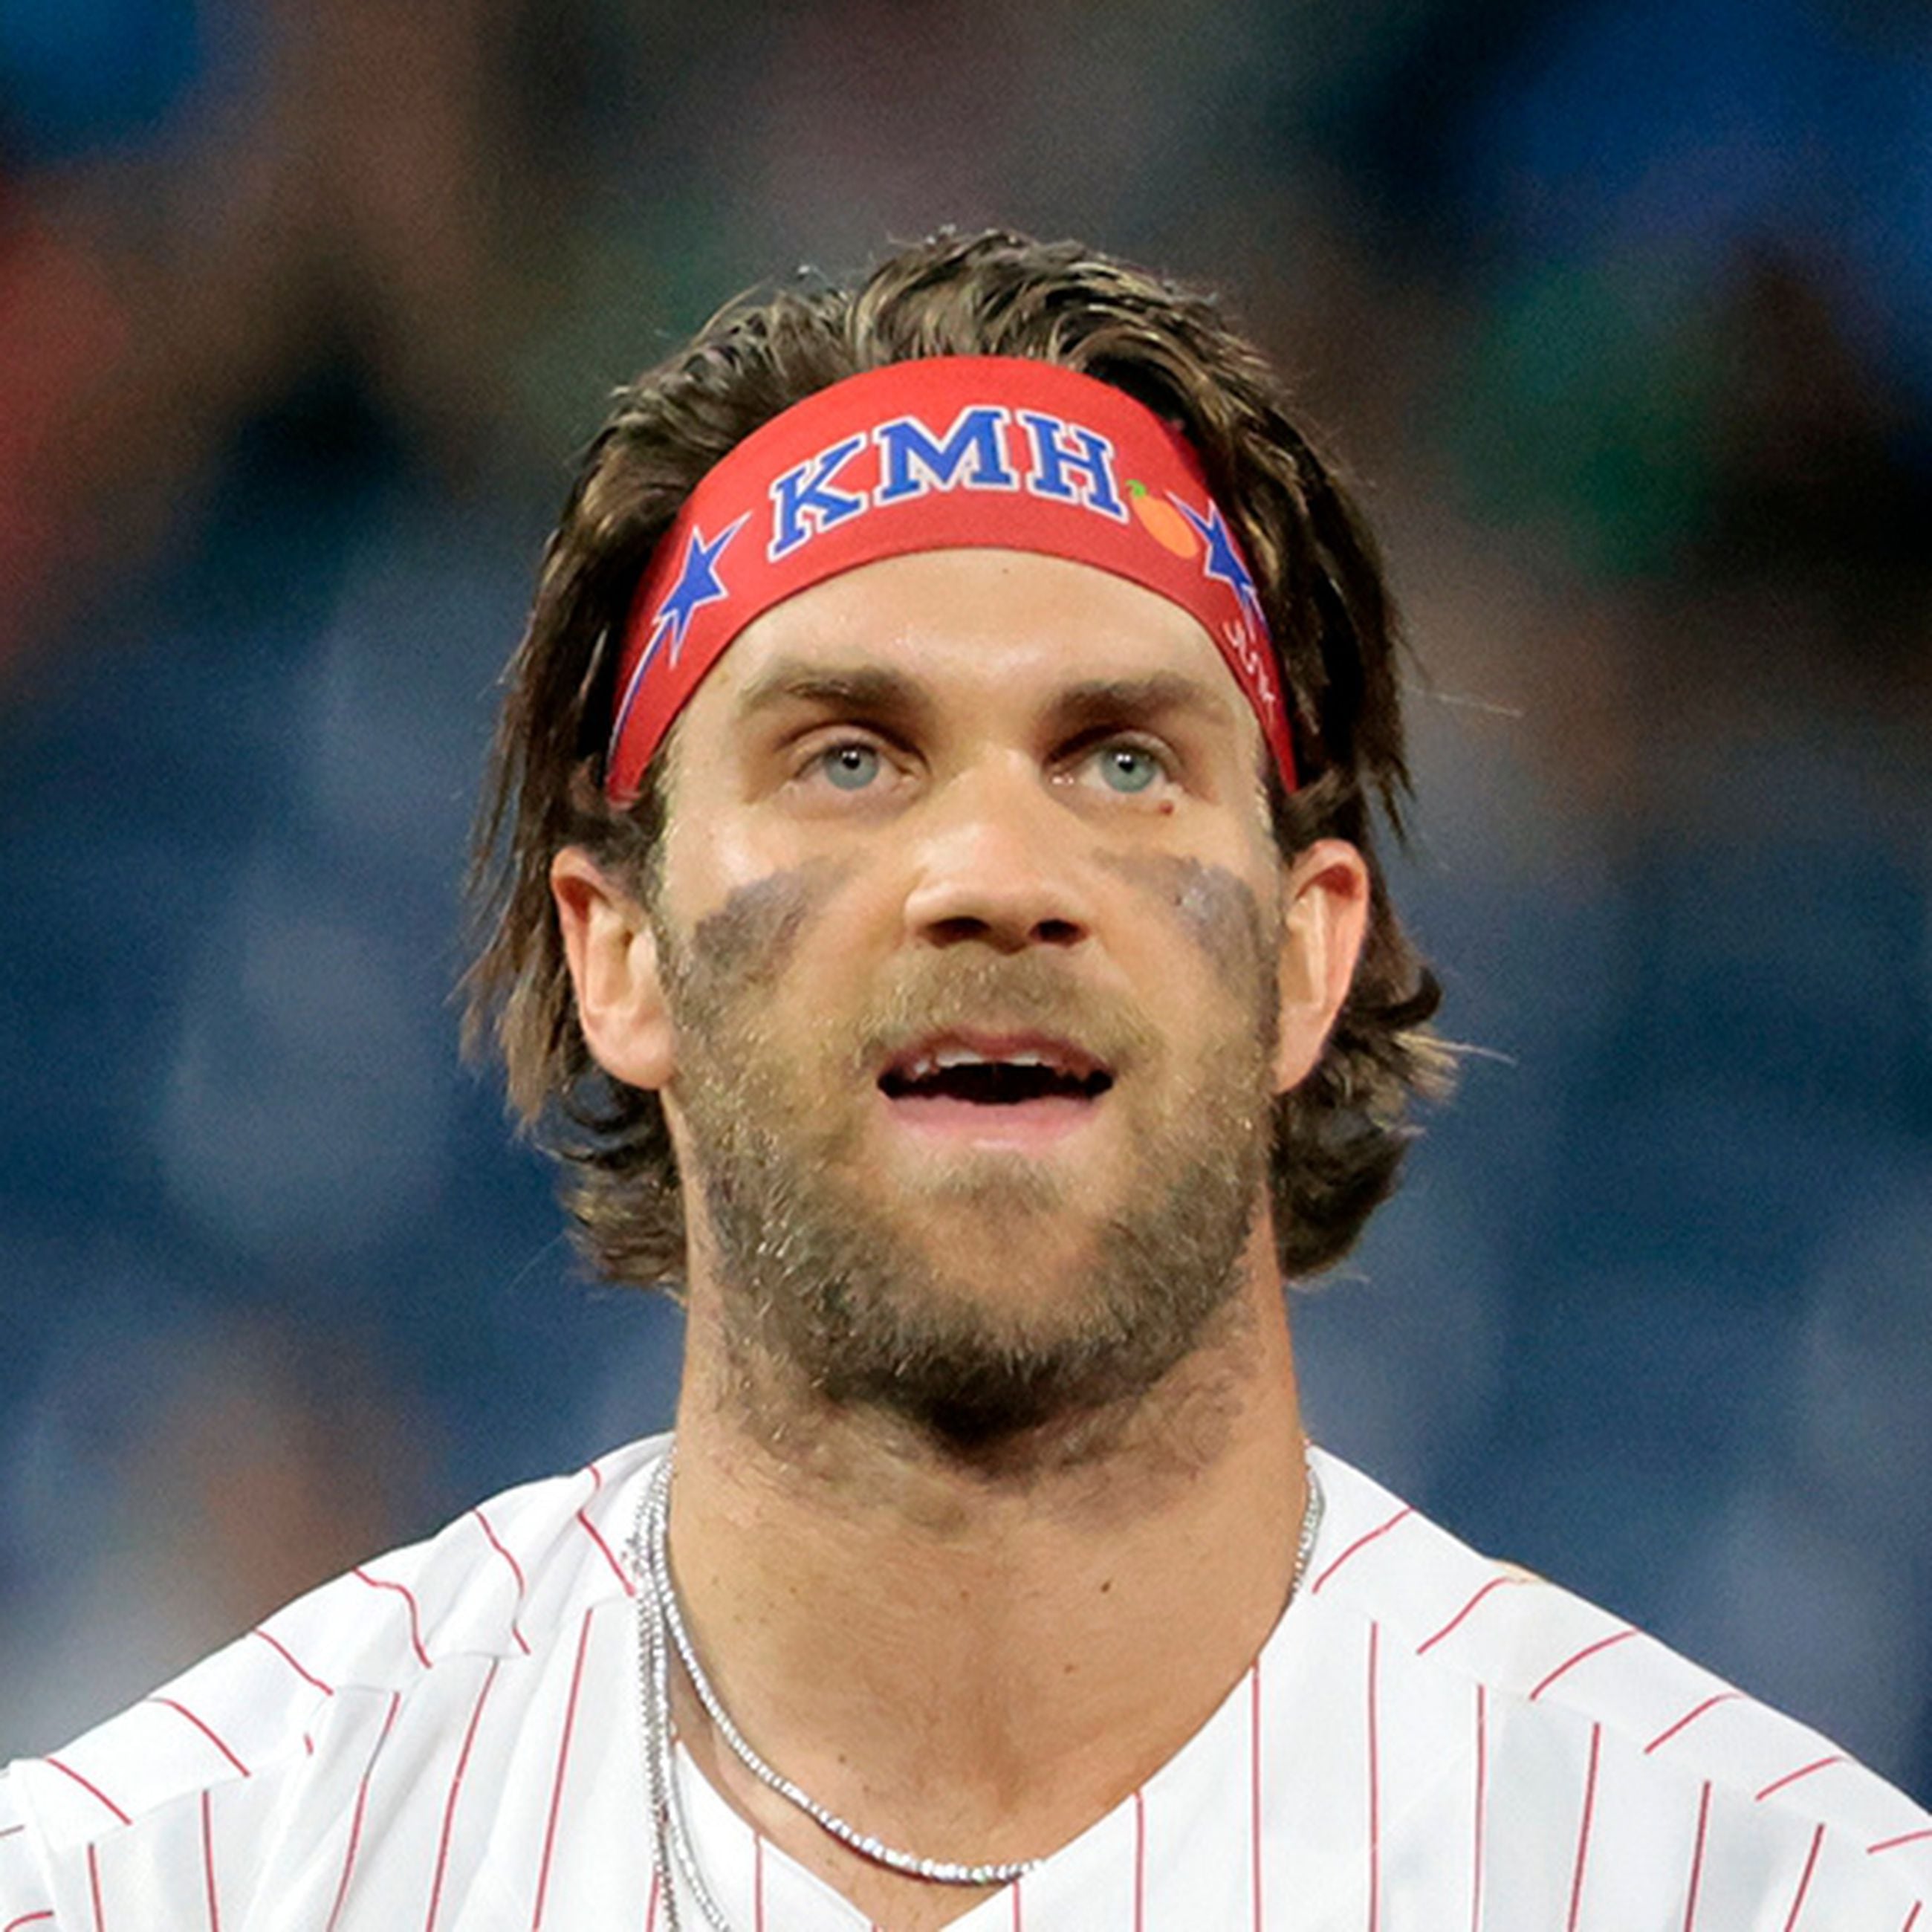 Baseball Hall of Fame chances for Phillies' Bryce Harper